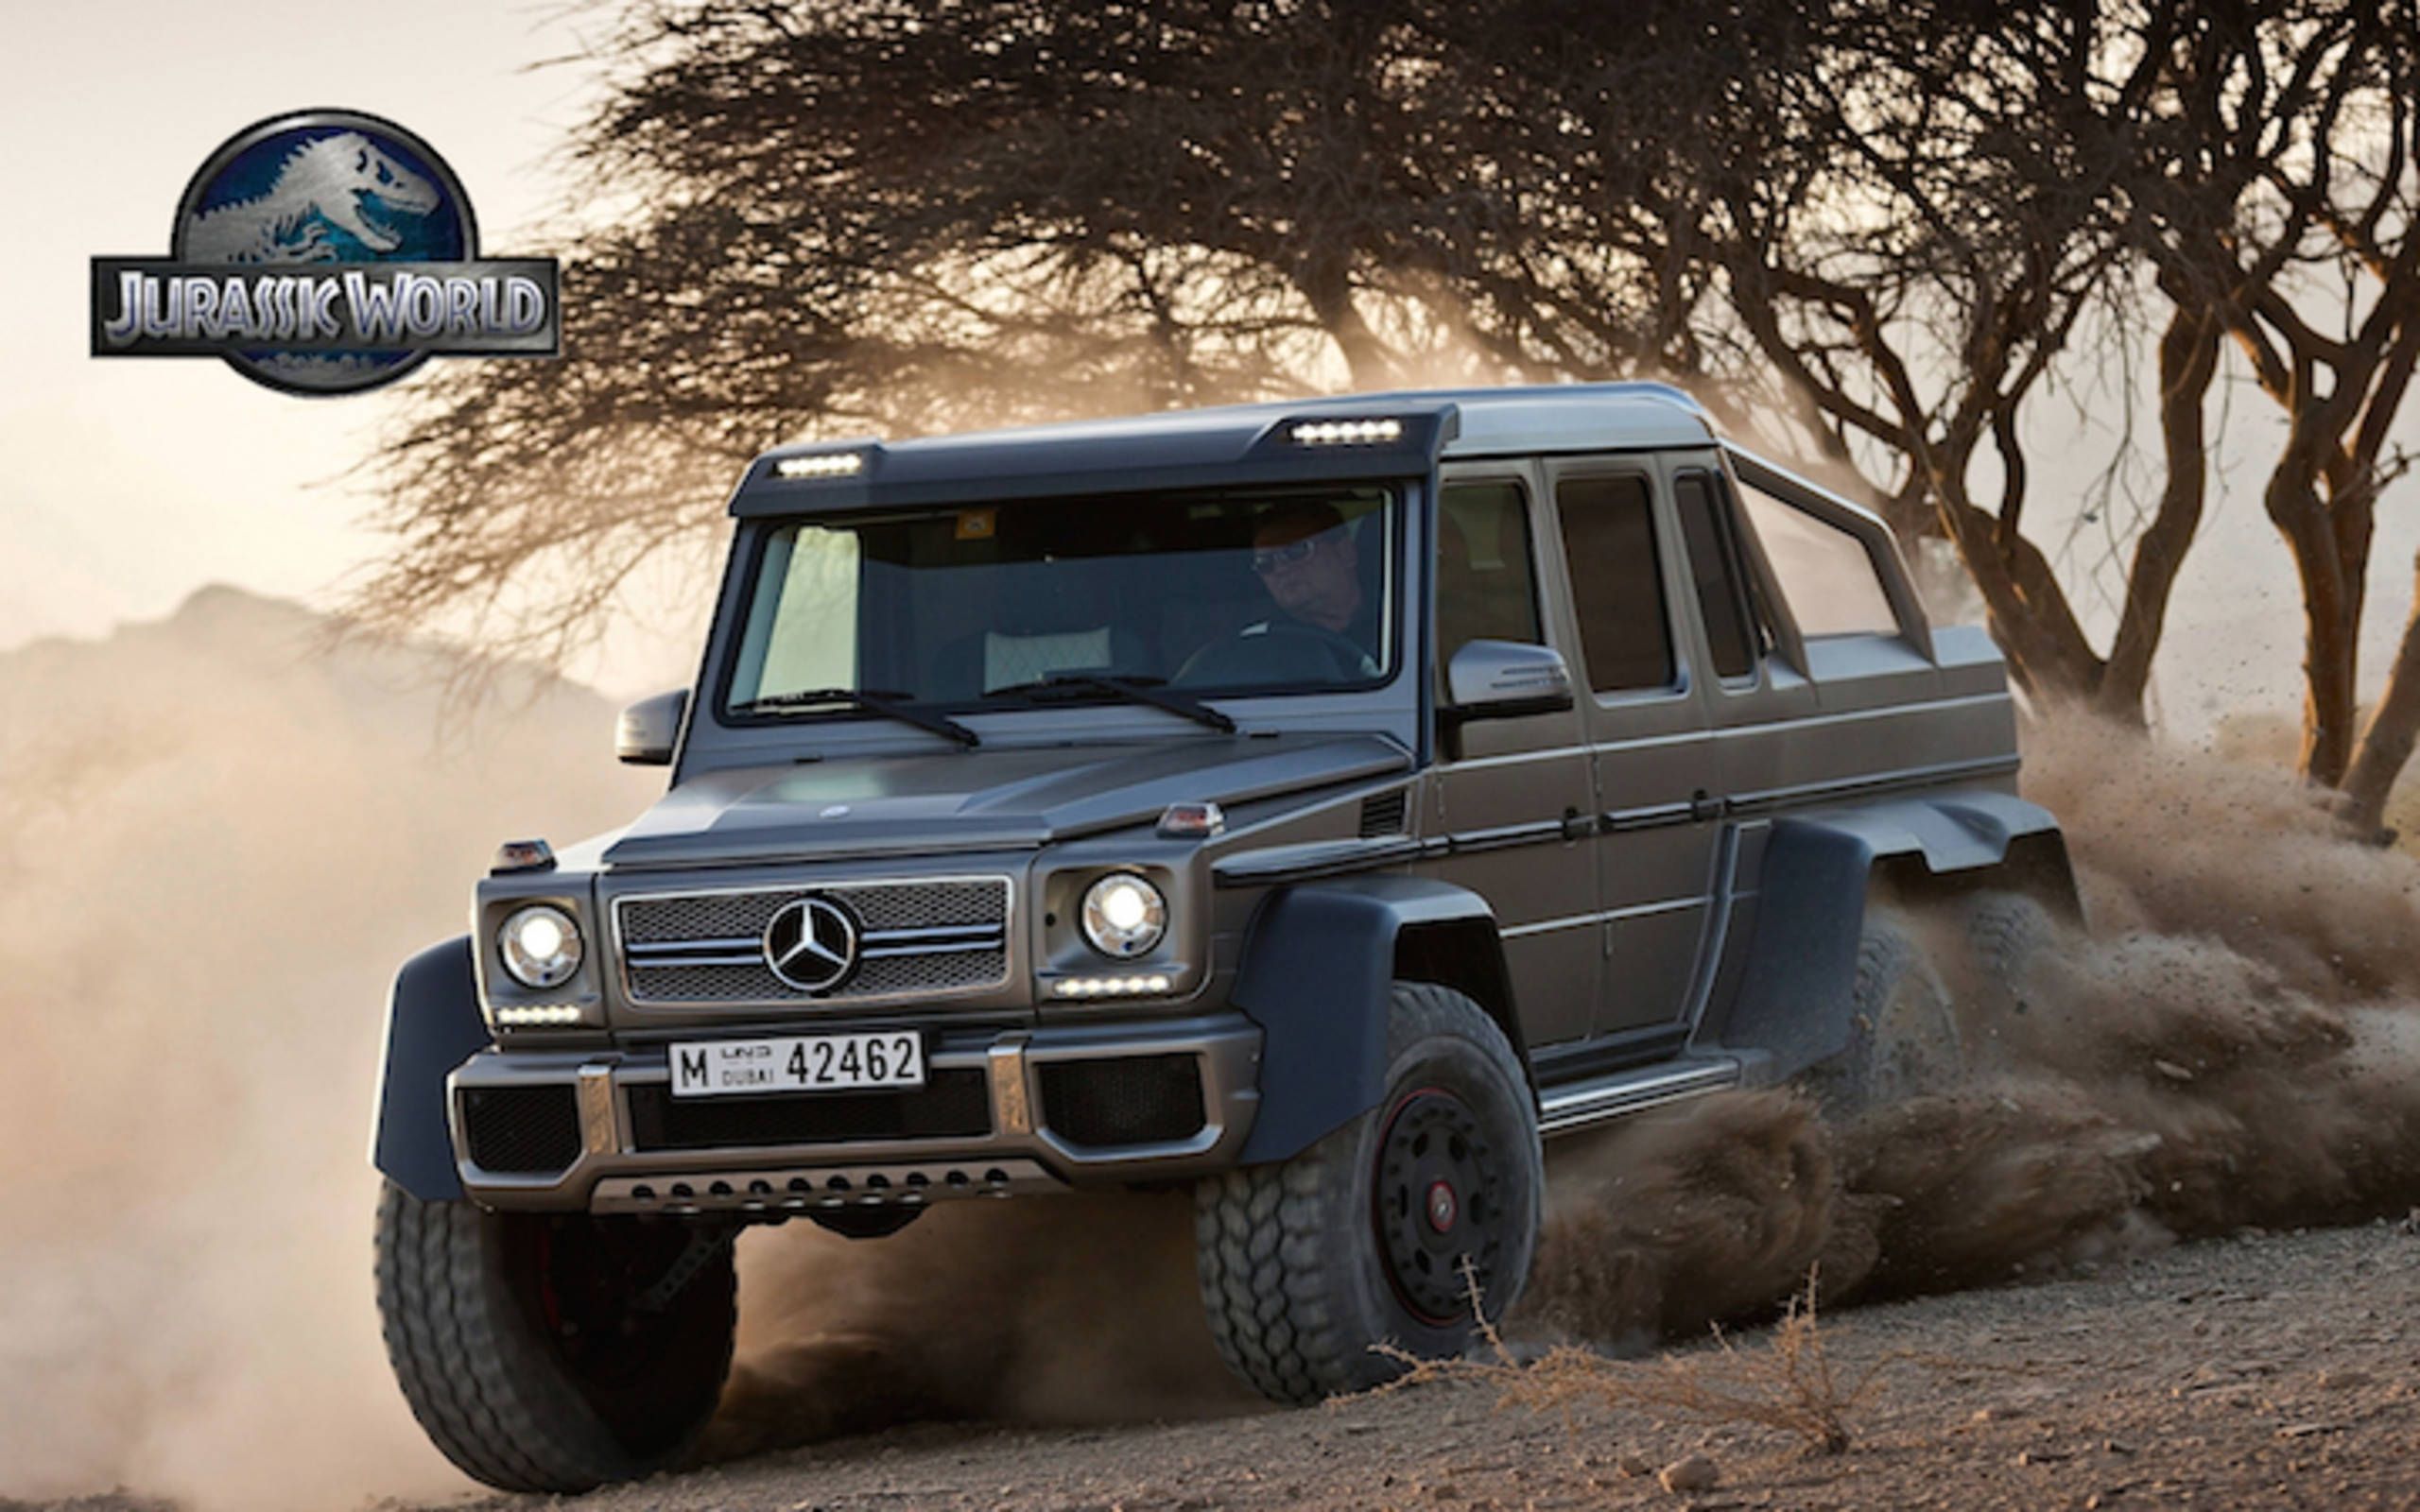 Mercedes Benz Vehicles To Be Featured In Jurassic World